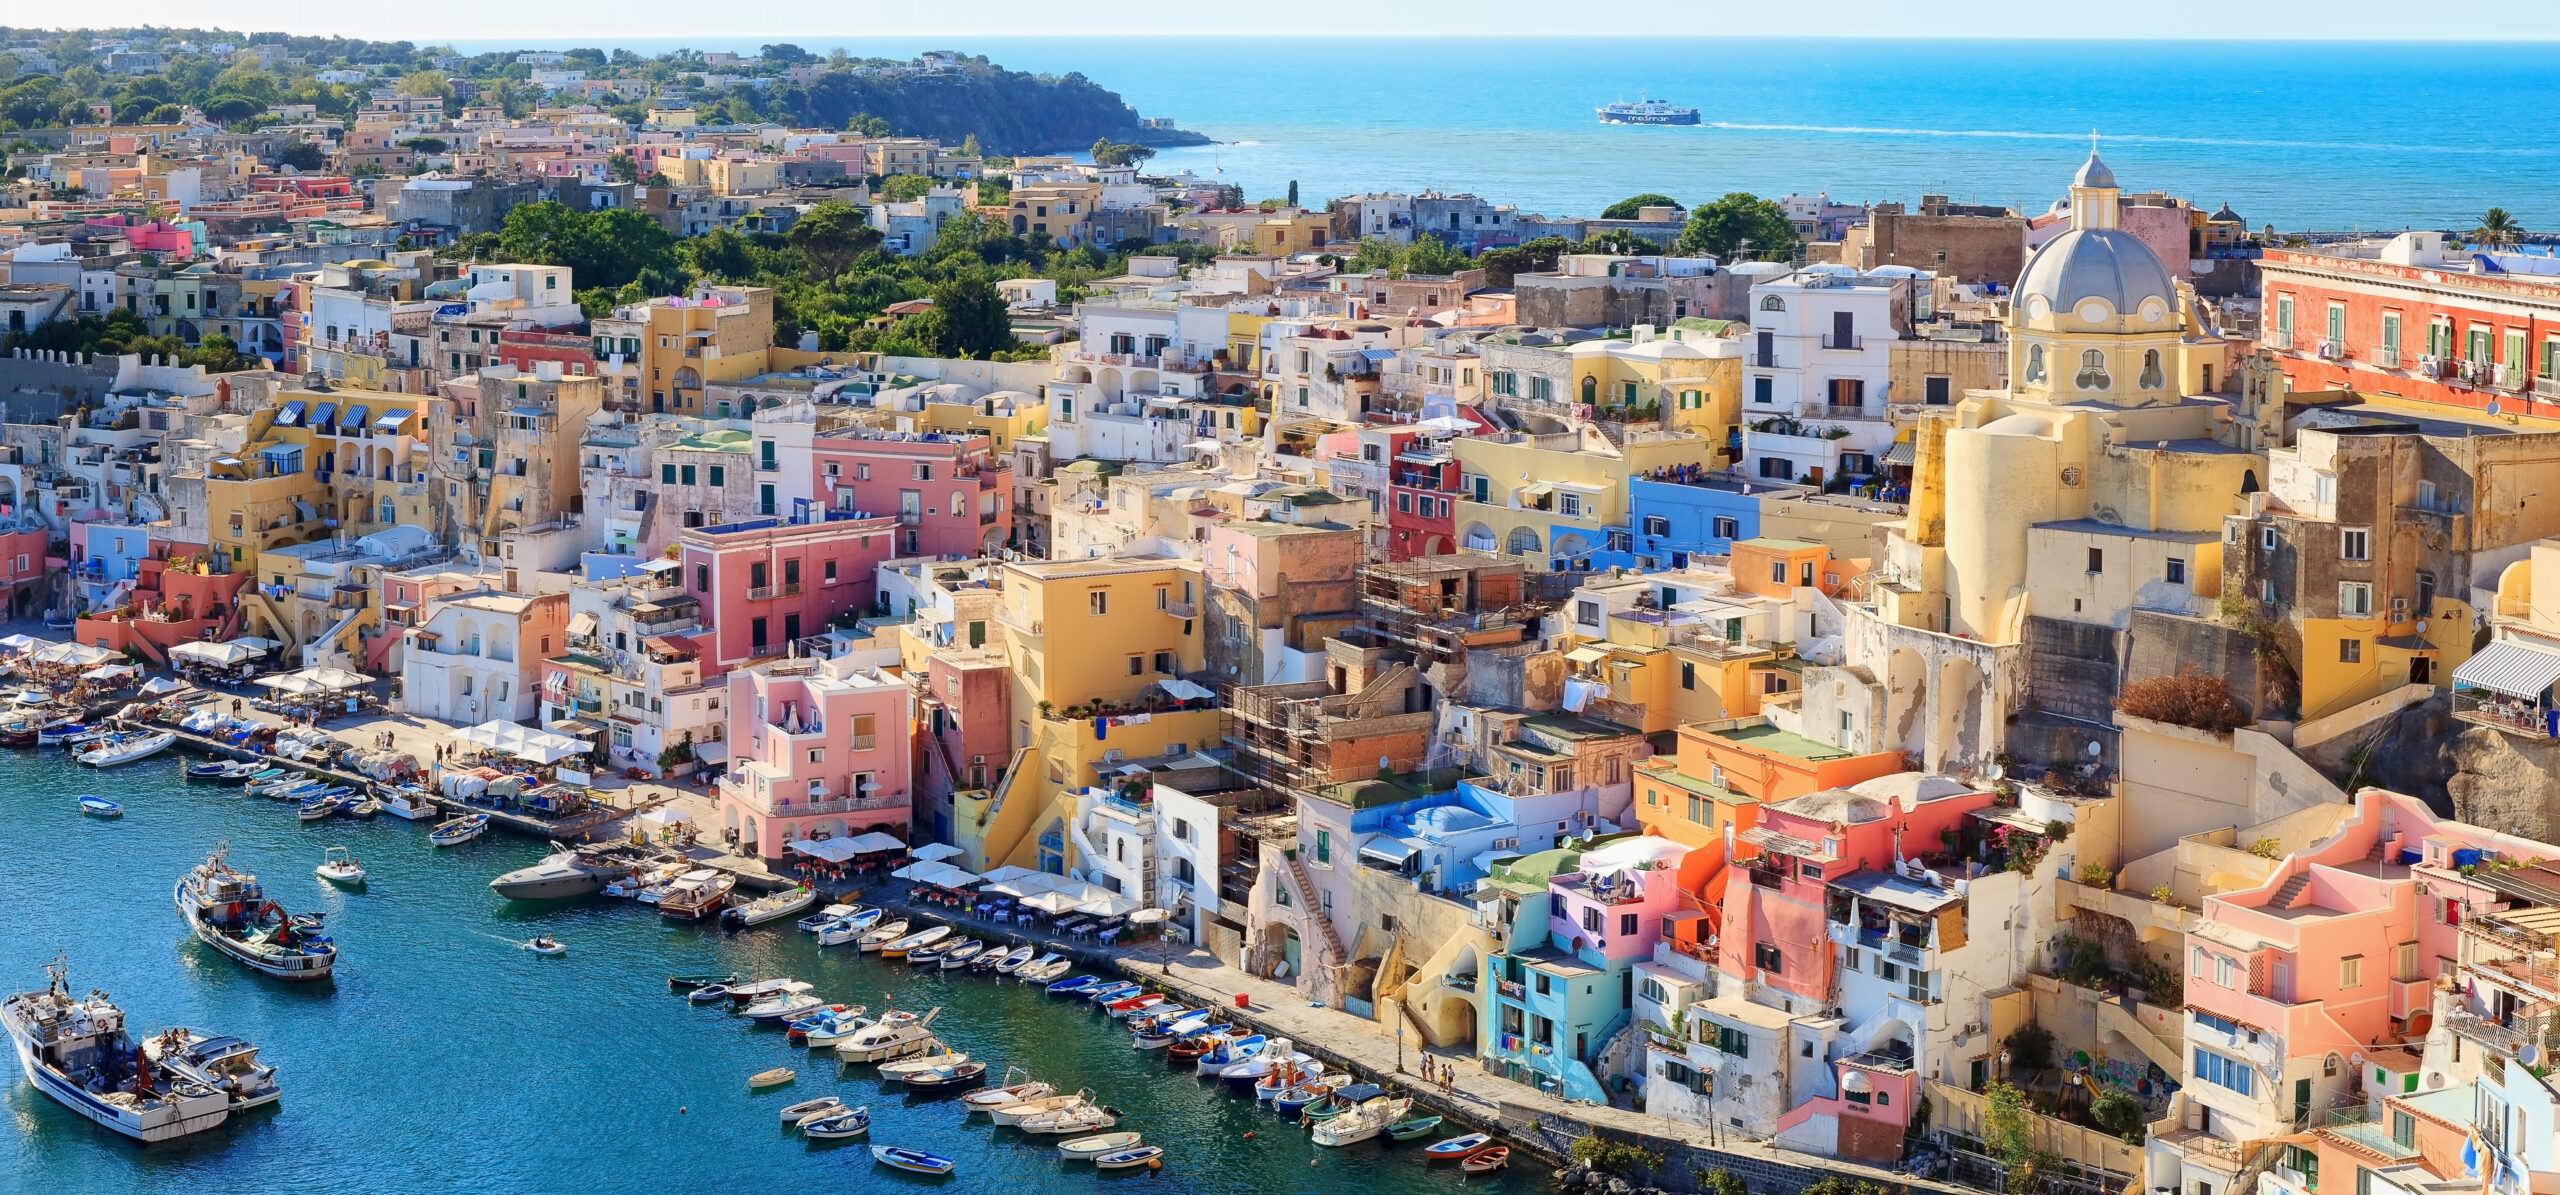 Naples: The Birthplace of Pizza - Panoramic view of the old village of fishermen's houses and the marina of Corricella, a classic panoramic view of the island of Procida, Italy.